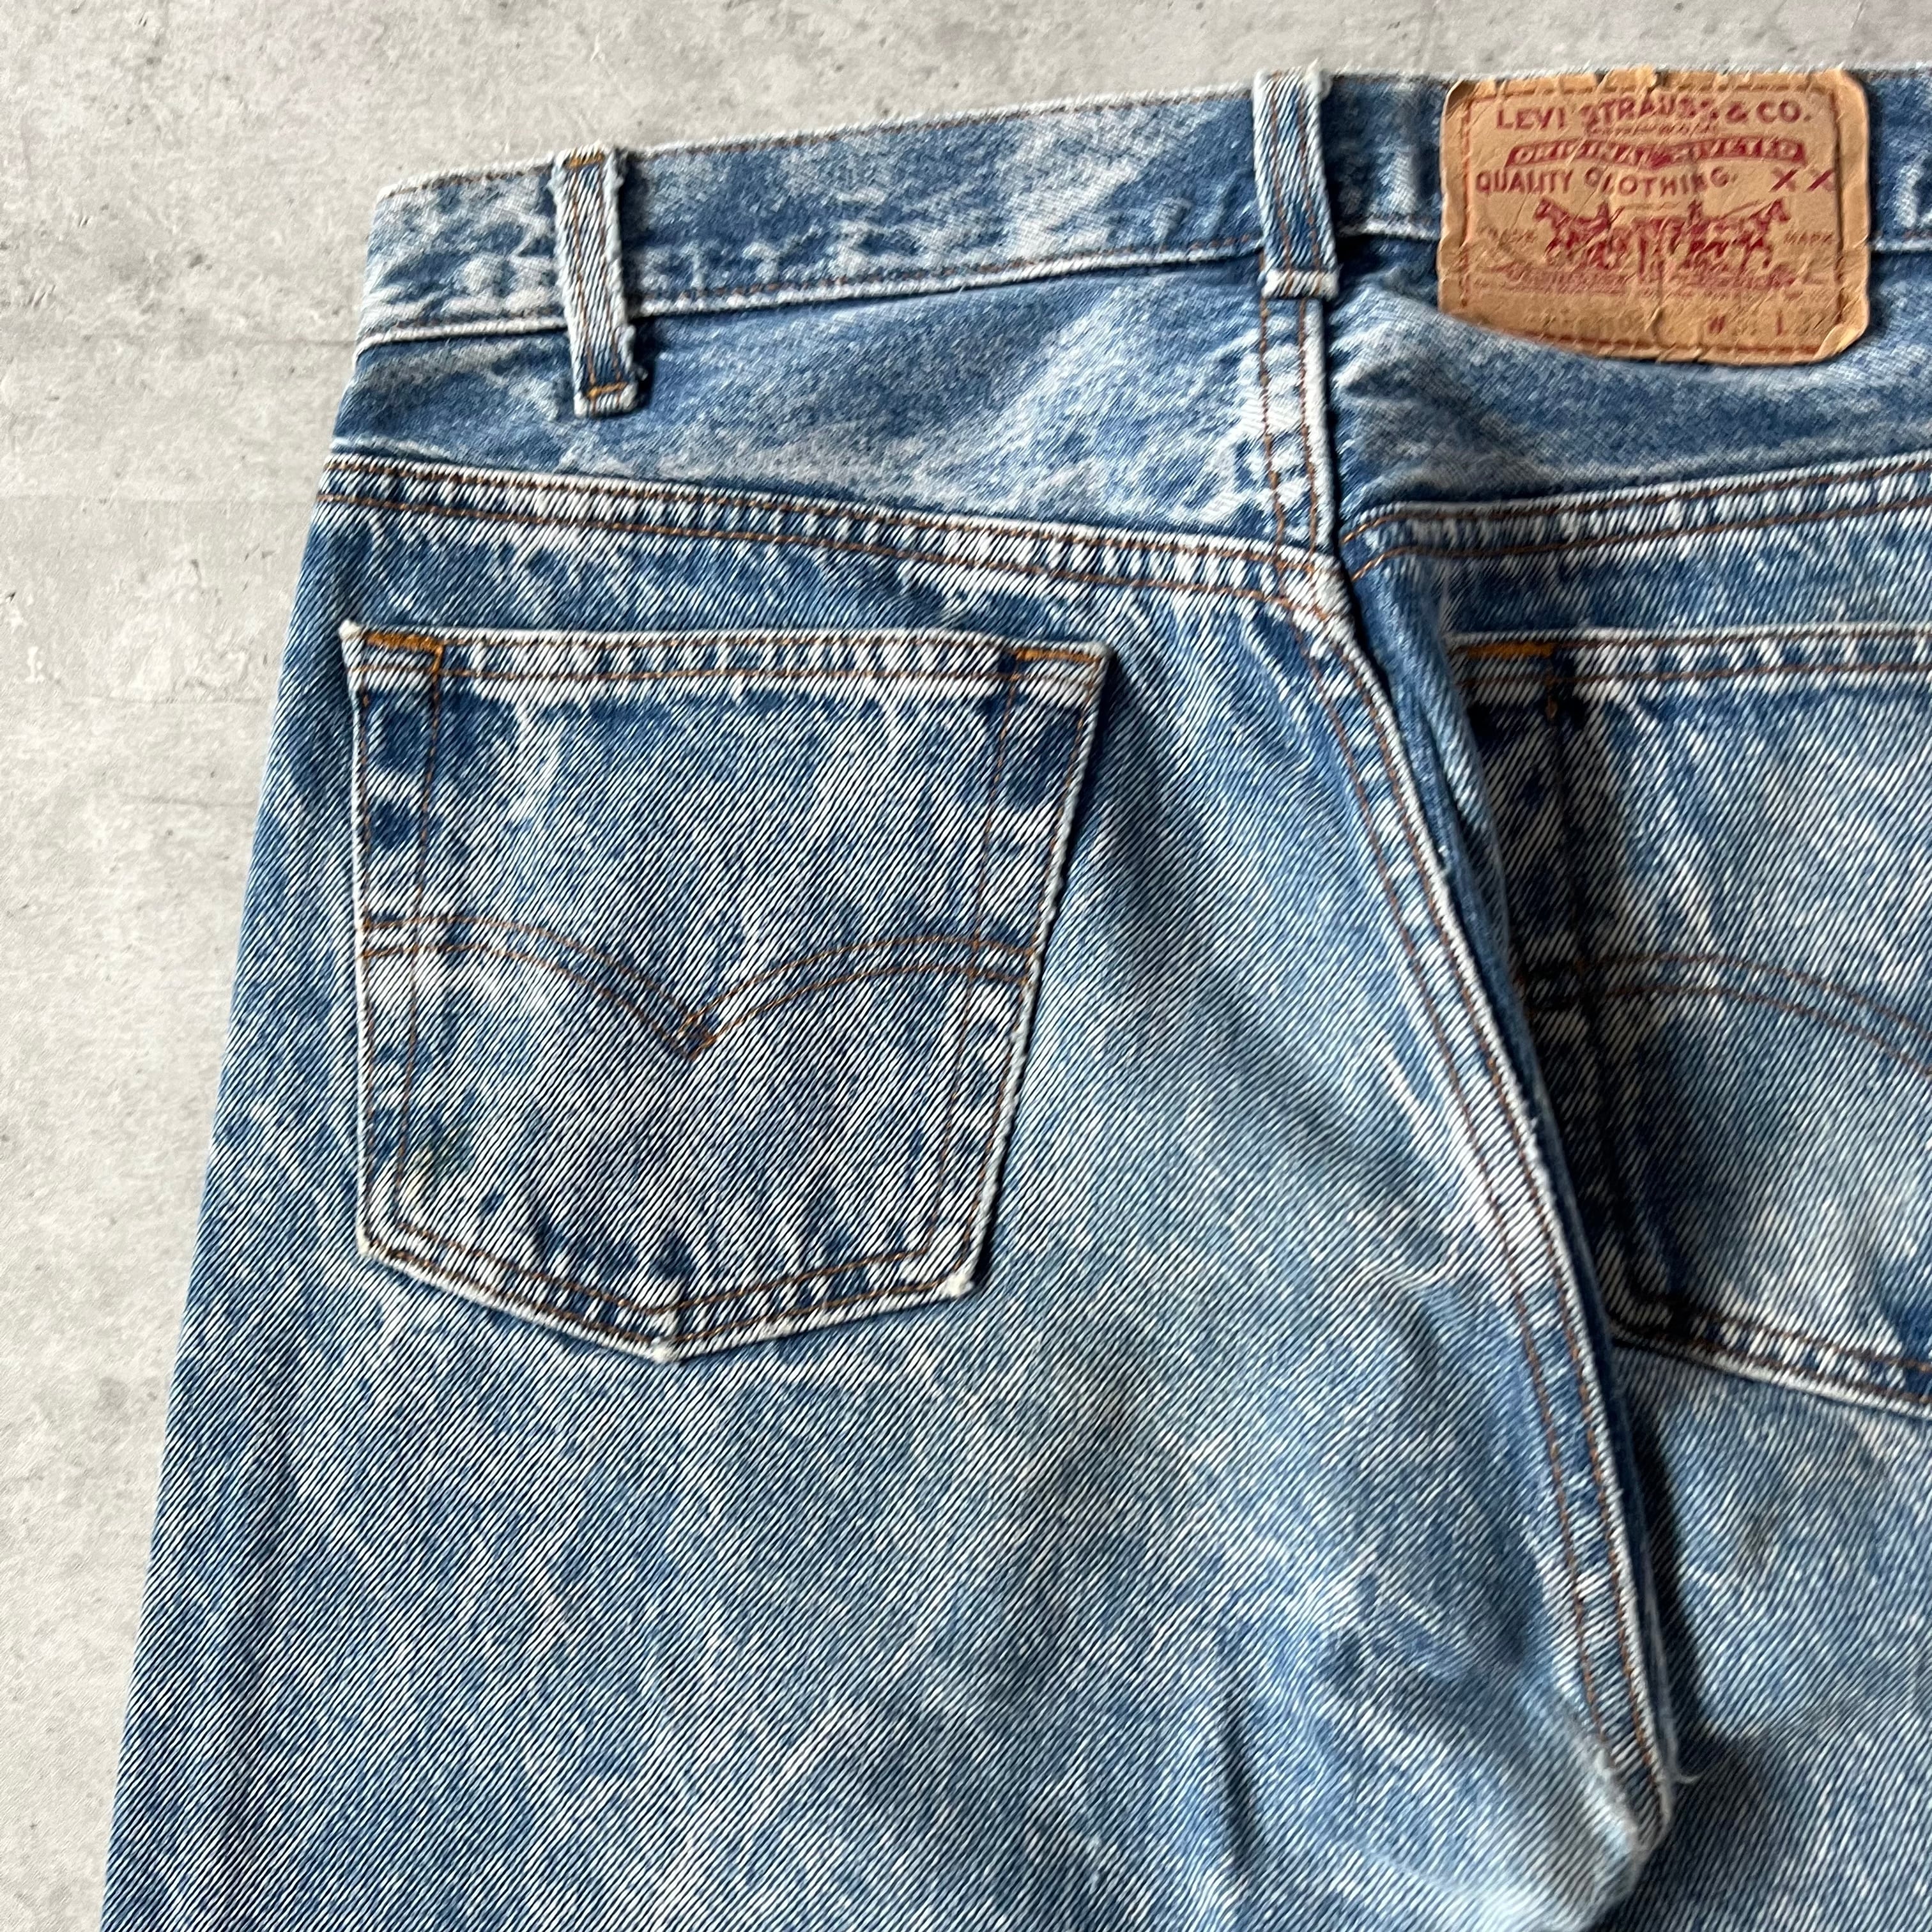 90s “Levis 501” W31L32 chemical washed denim pants made in usa 80 